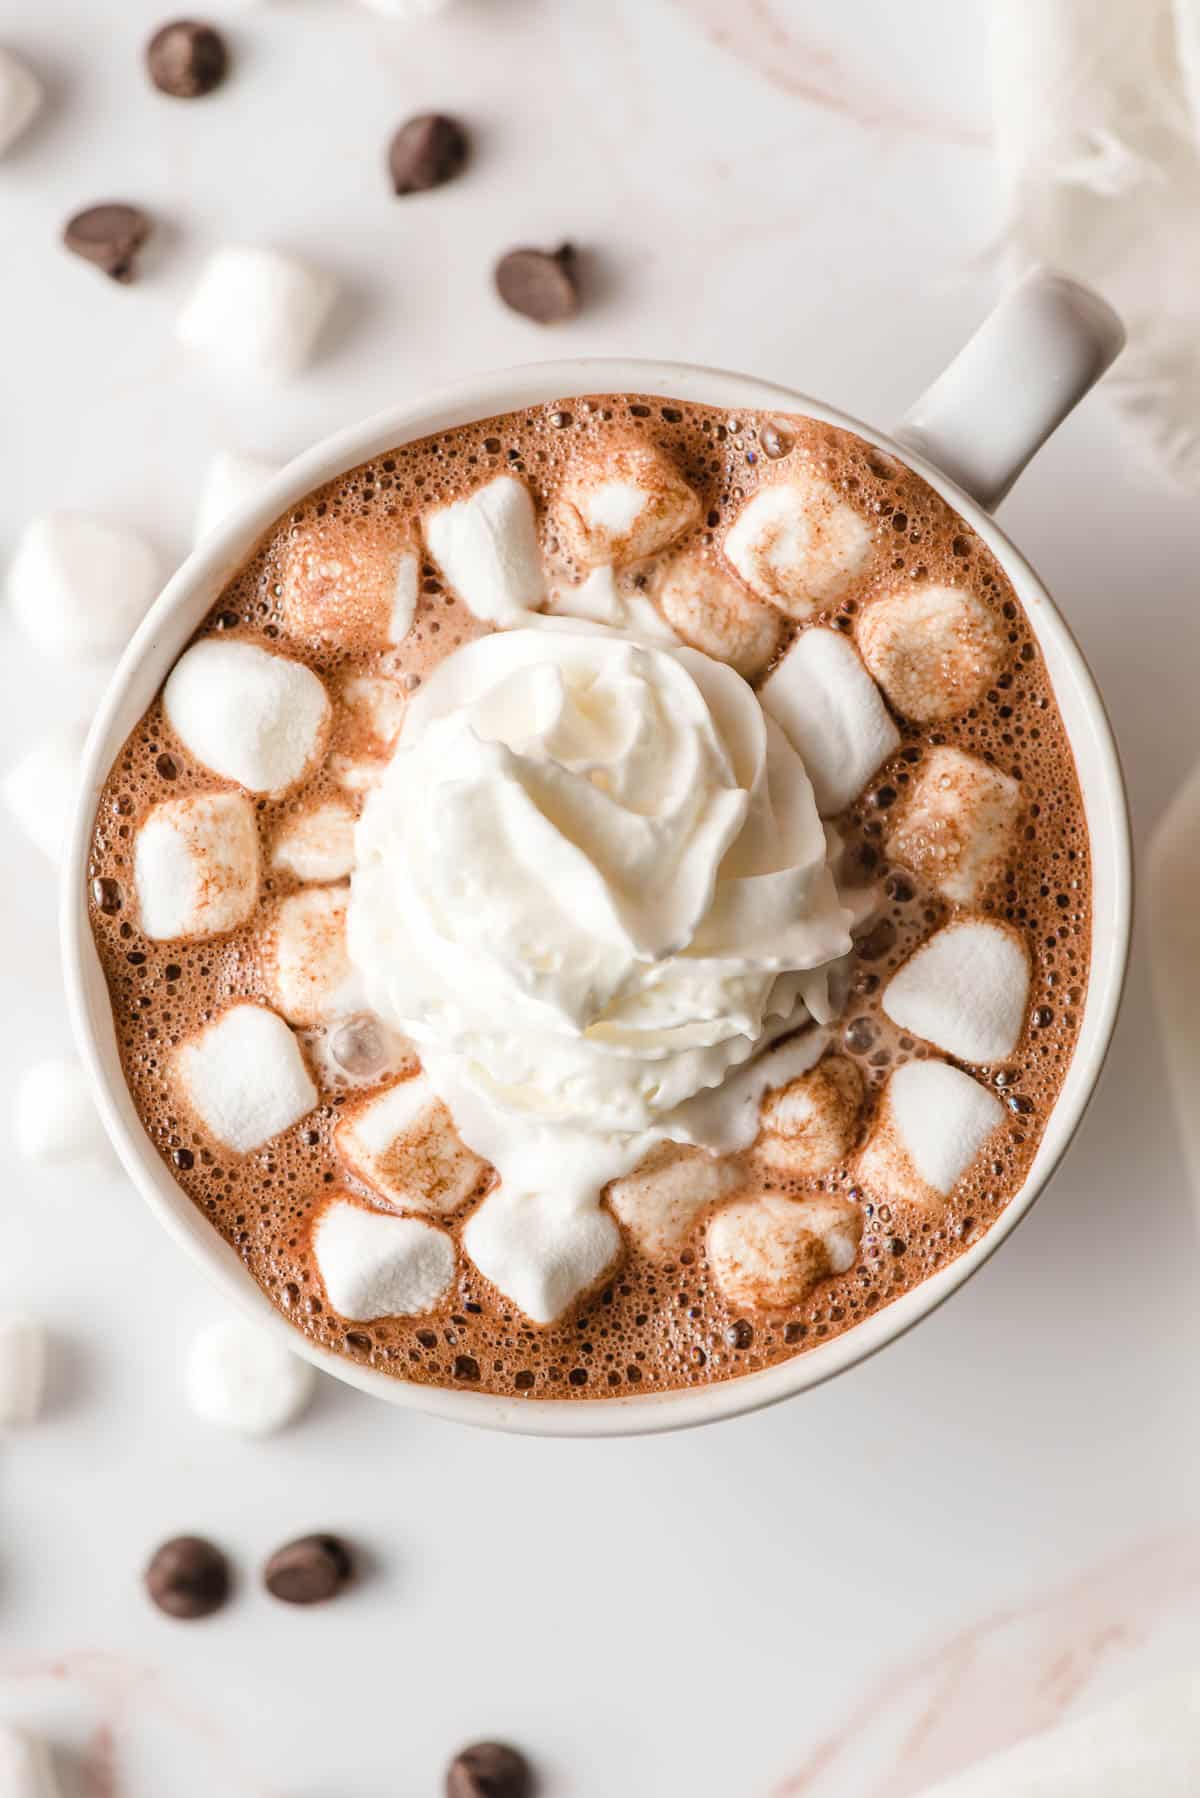 Hot chocolate with marshmallows and whipped cream in a white mug.